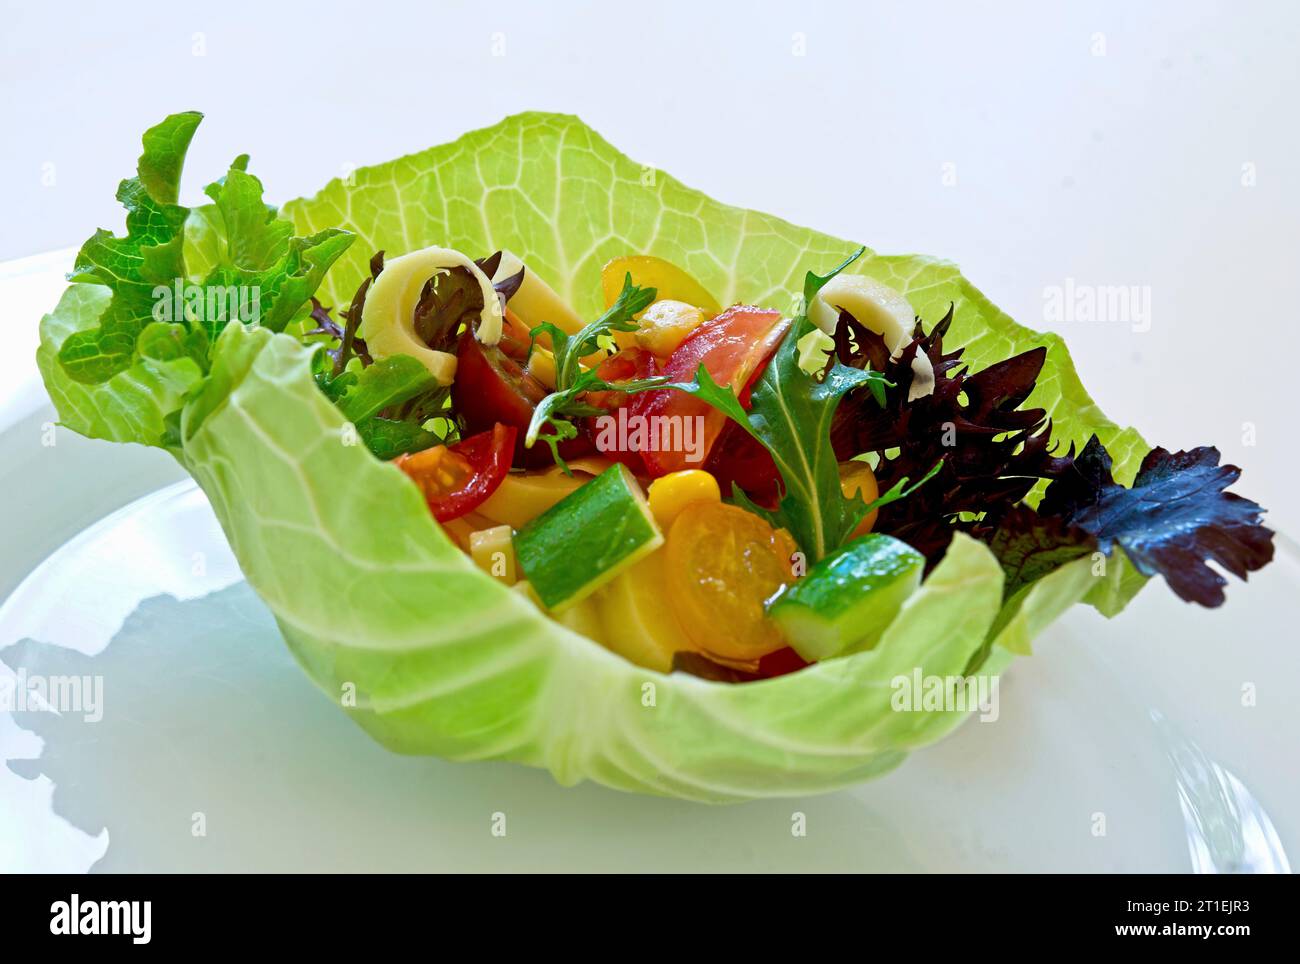 White cabbage leaf bowl with mixed vegetable salad and herbs Stock Photo